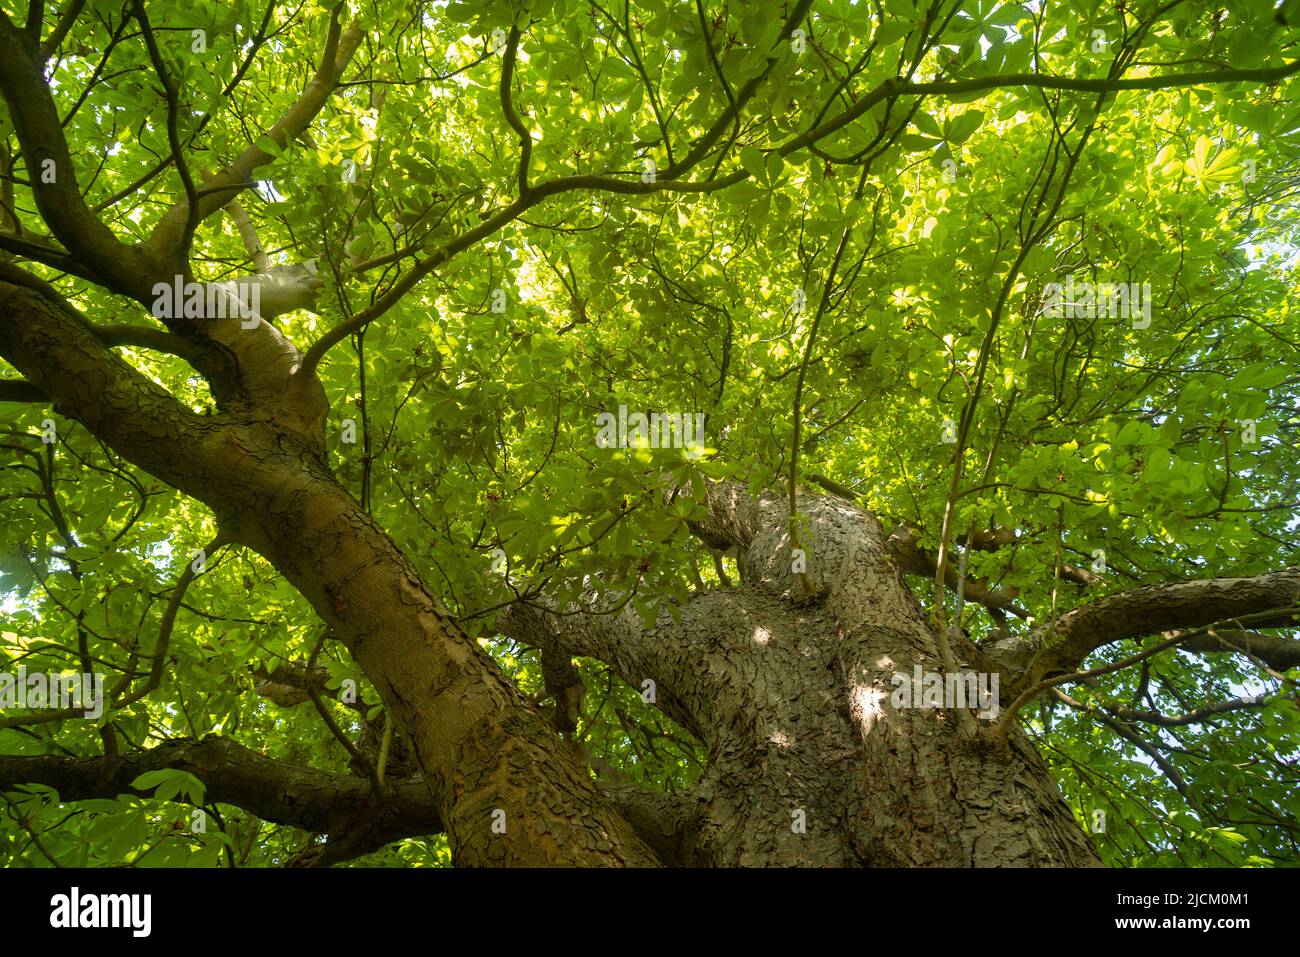 Looking up into the dense canopy of lush green leaves of Aesculus hippocastanum horse chestnut tree Stock Photo